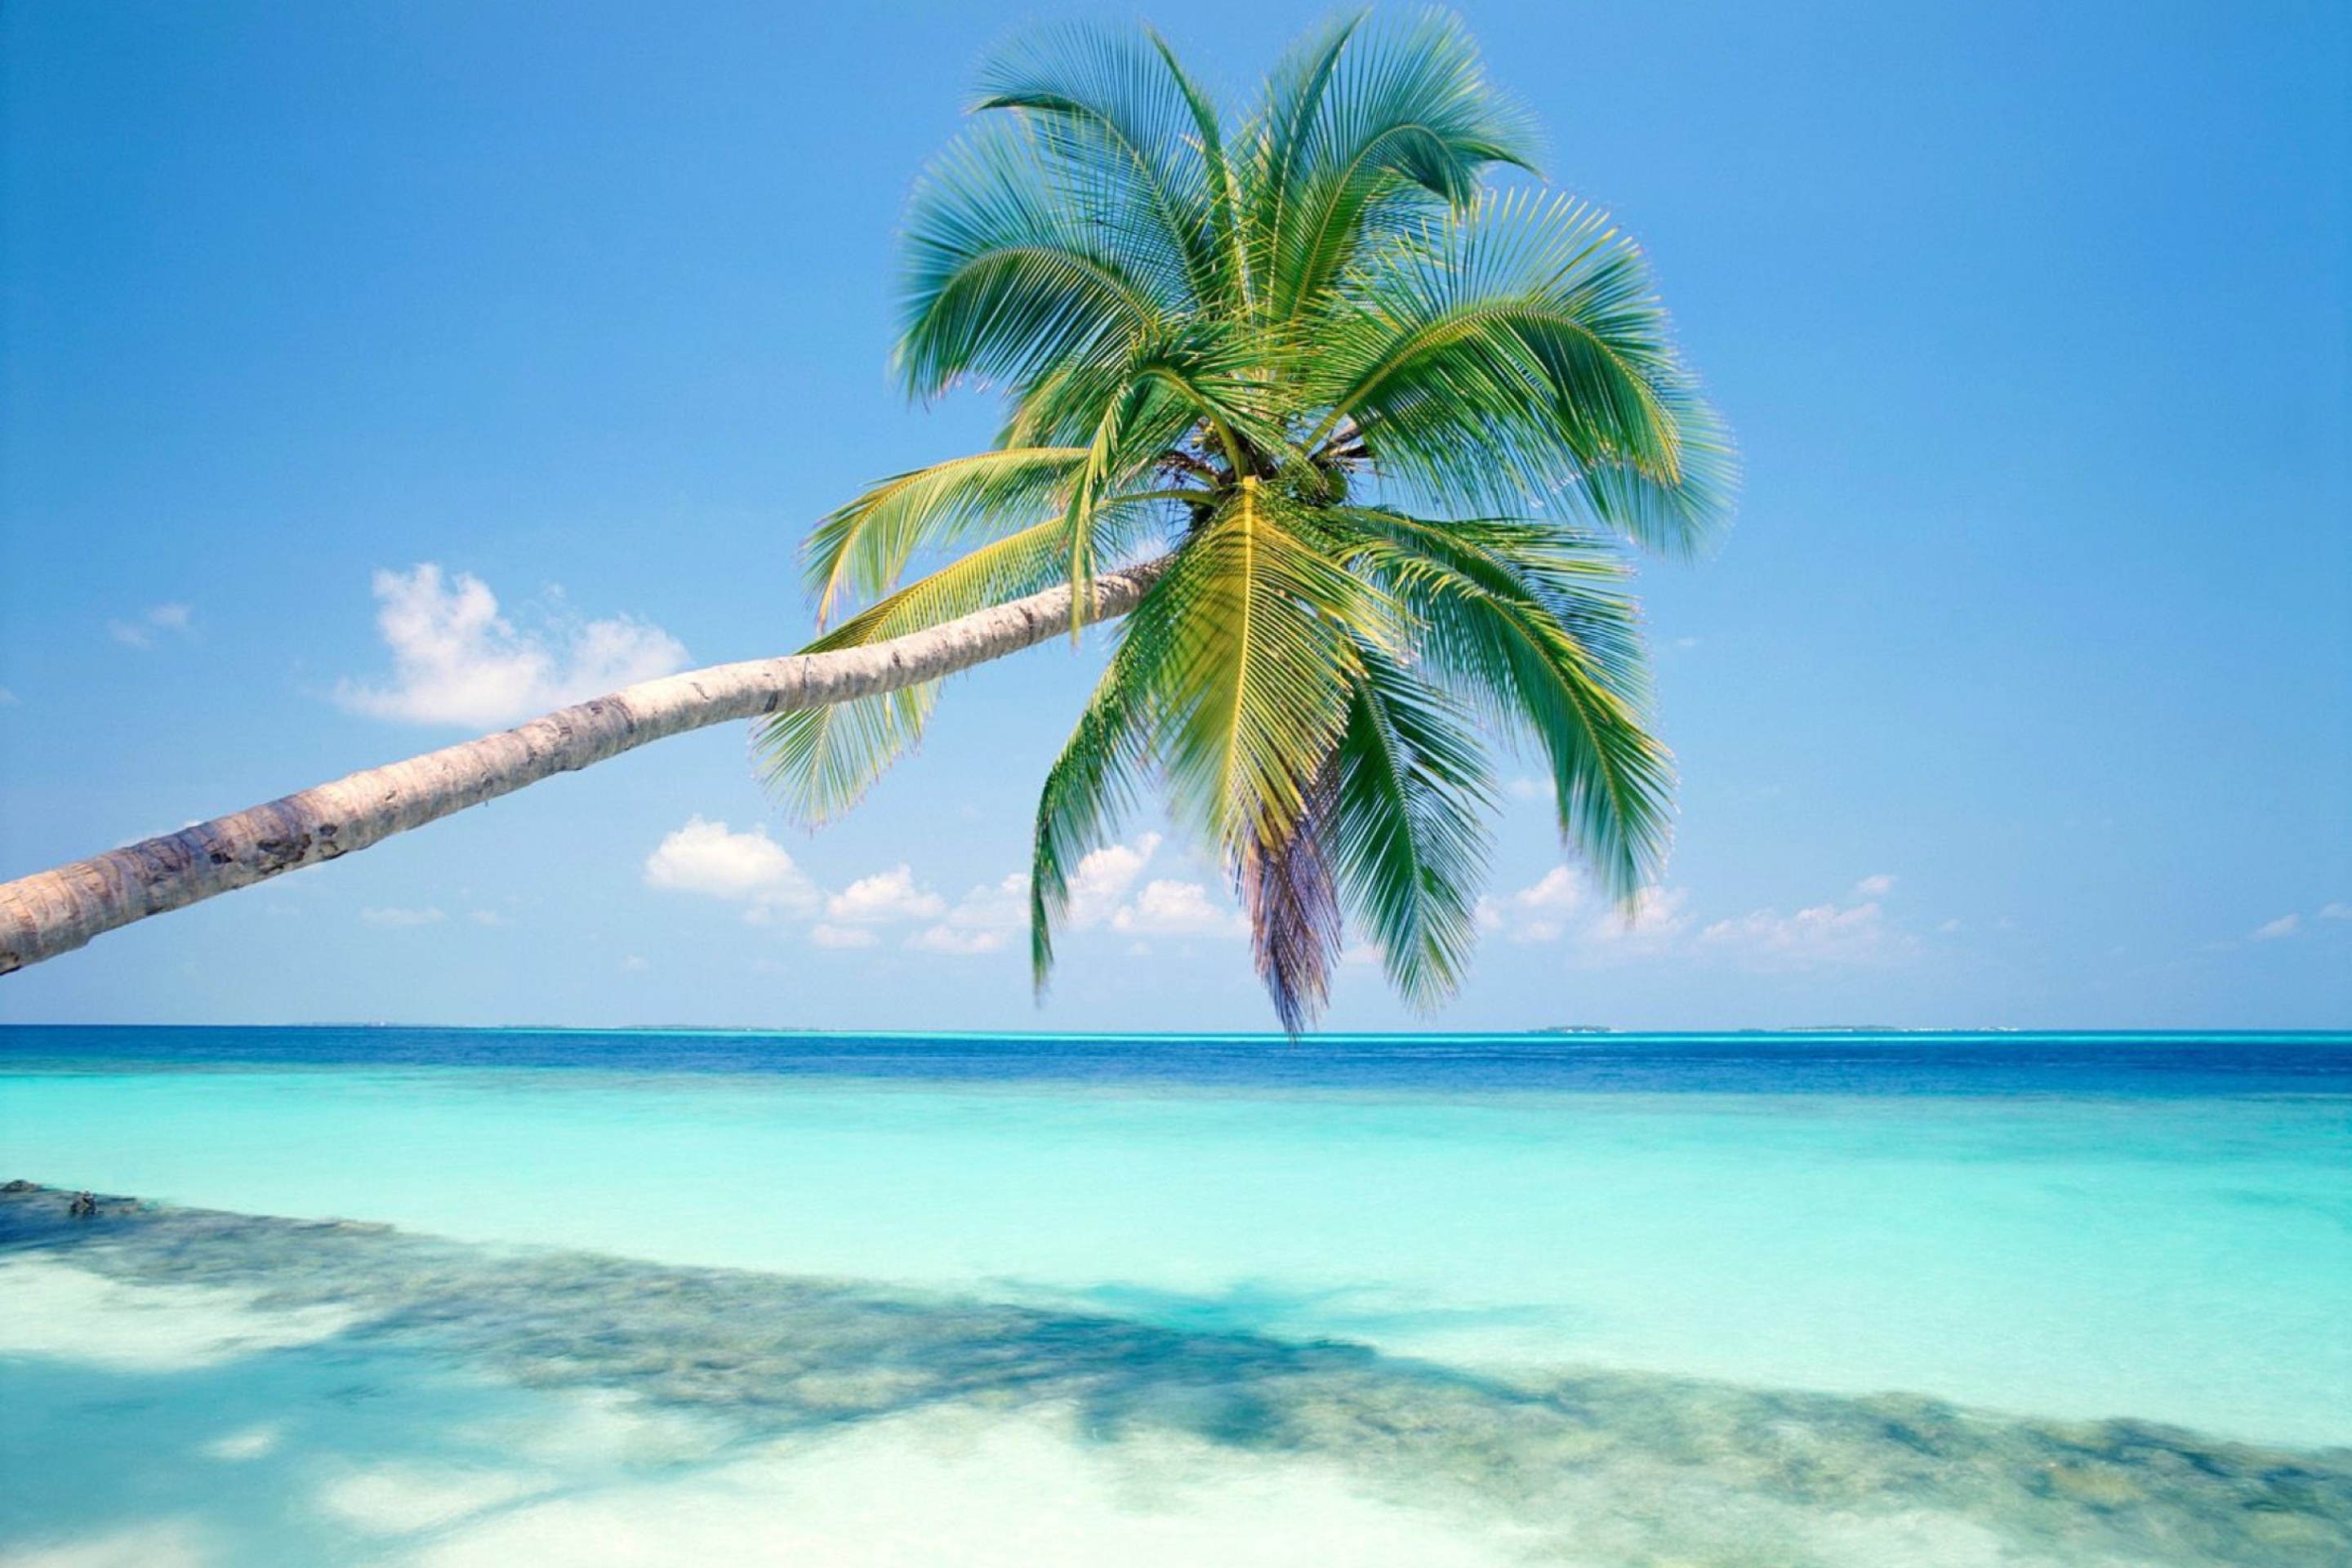 Blue Shore And Palm Tree wallpaper 2880x1920